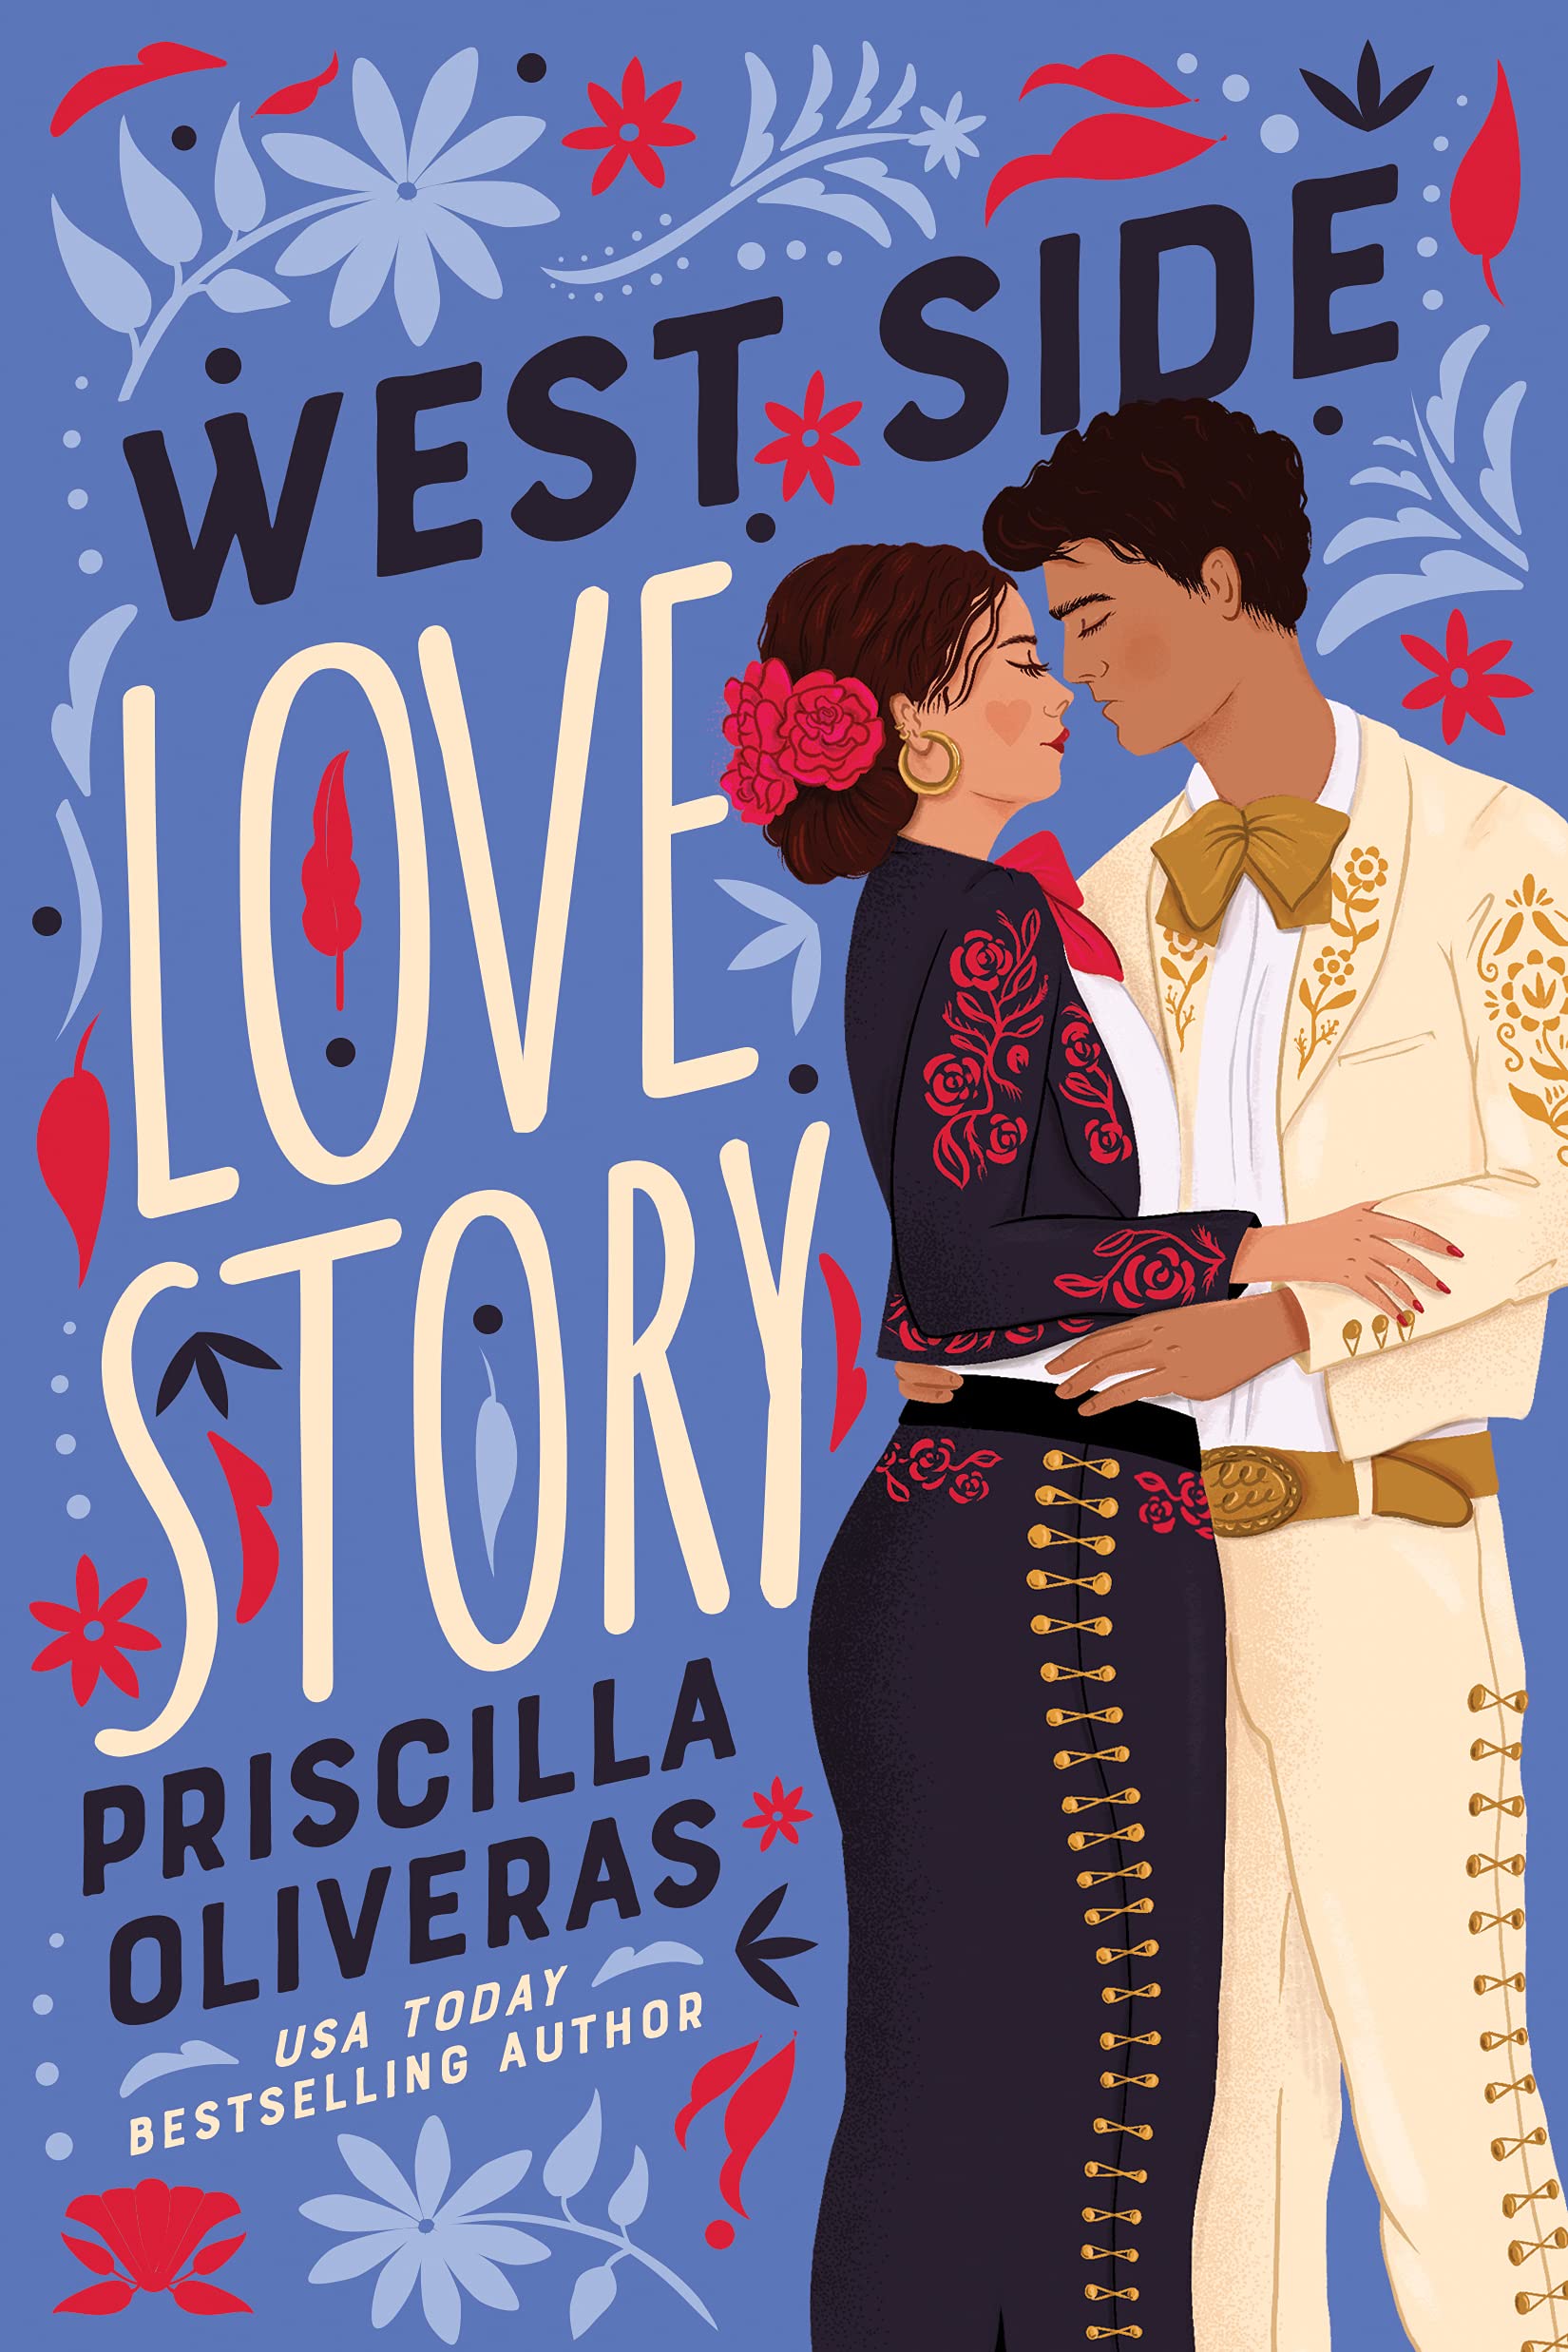 West Side Love Story by Priscilla Oliver